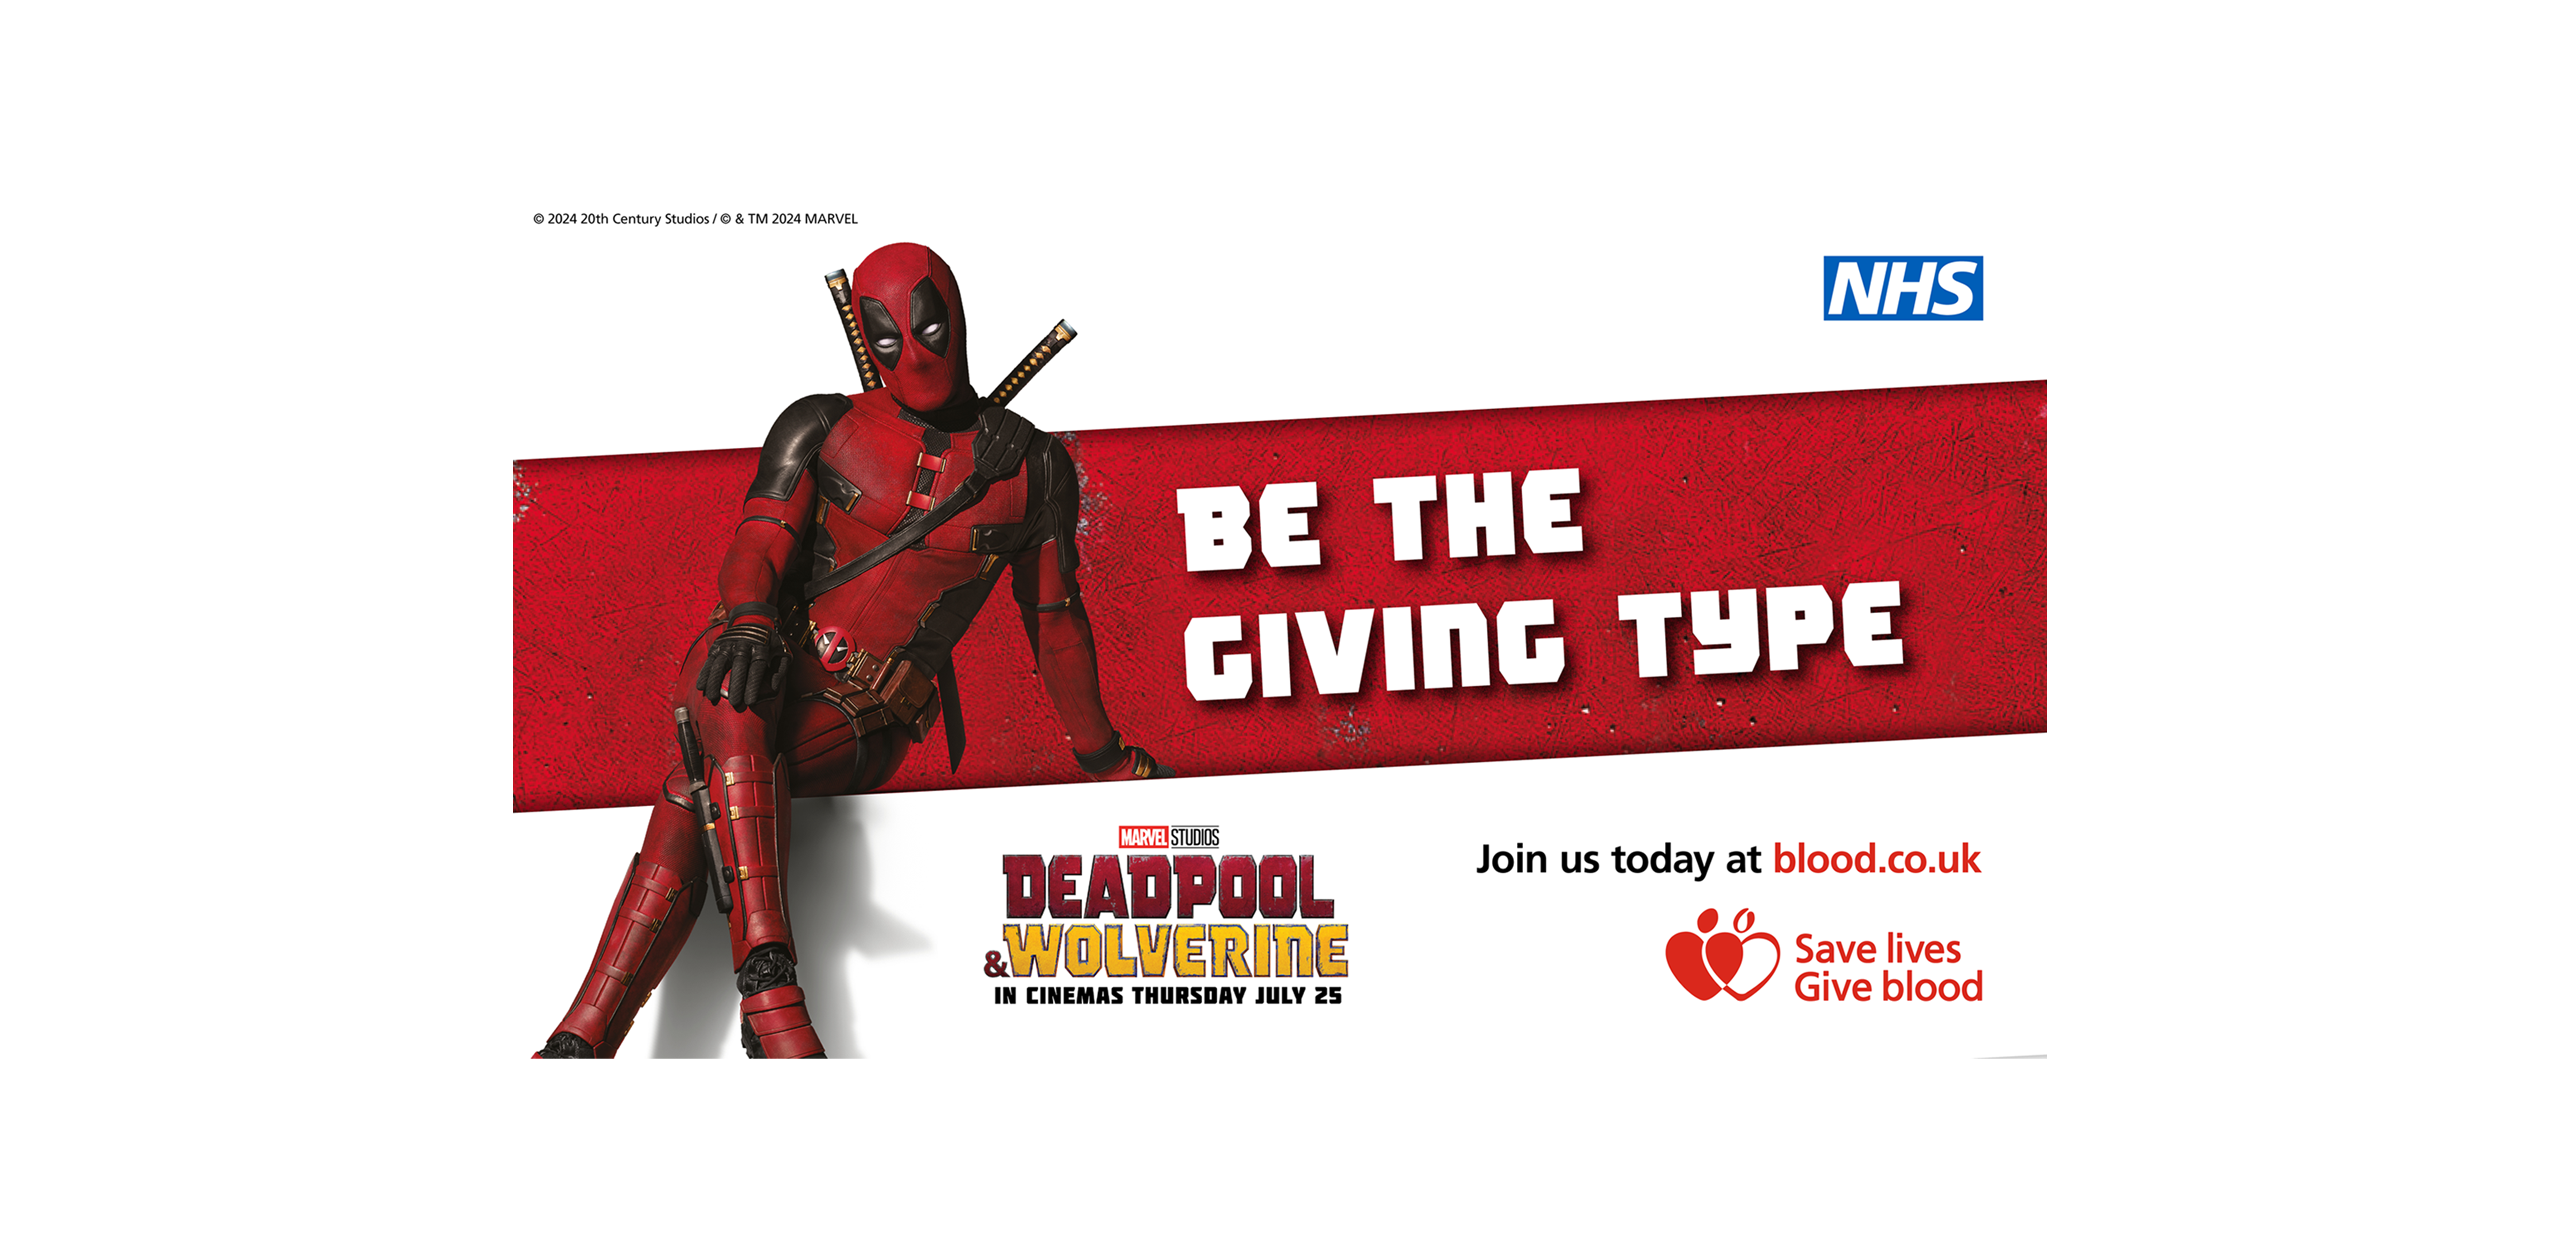 Disney Collaborates with NHS Blood & Transplant for a “Deadpool & Wolverine” Blood Donation Campaign